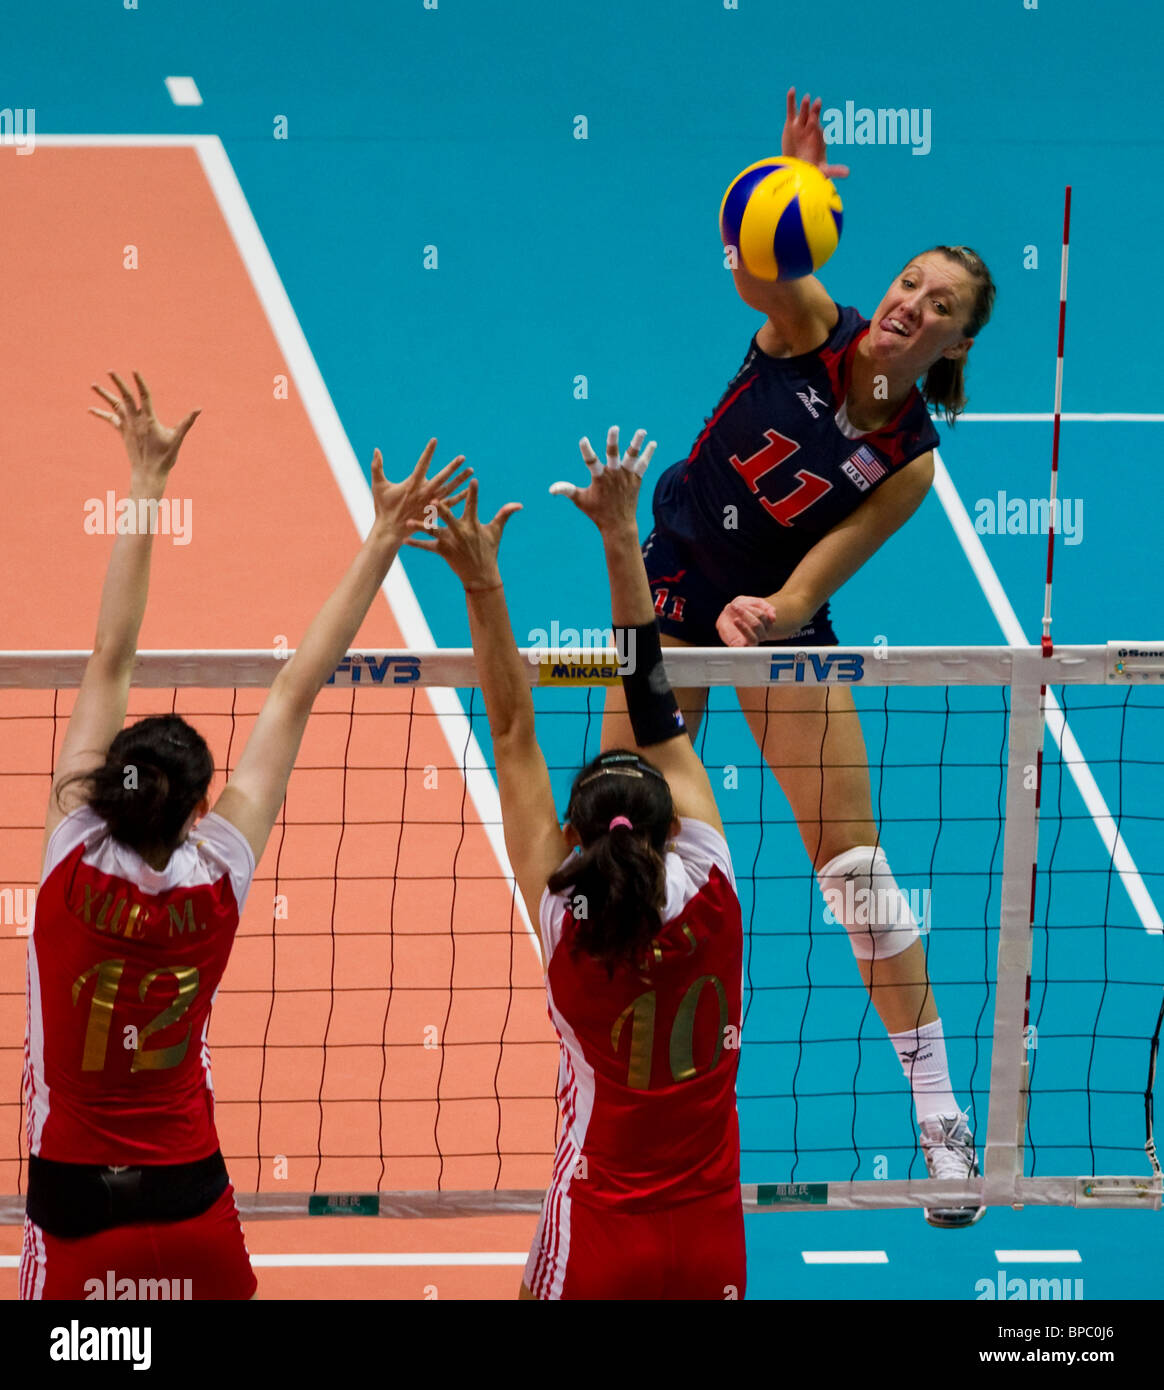 Jordan Larson of the USA spikes the ball against China during their  volleyball game Stock Photo - Alamy